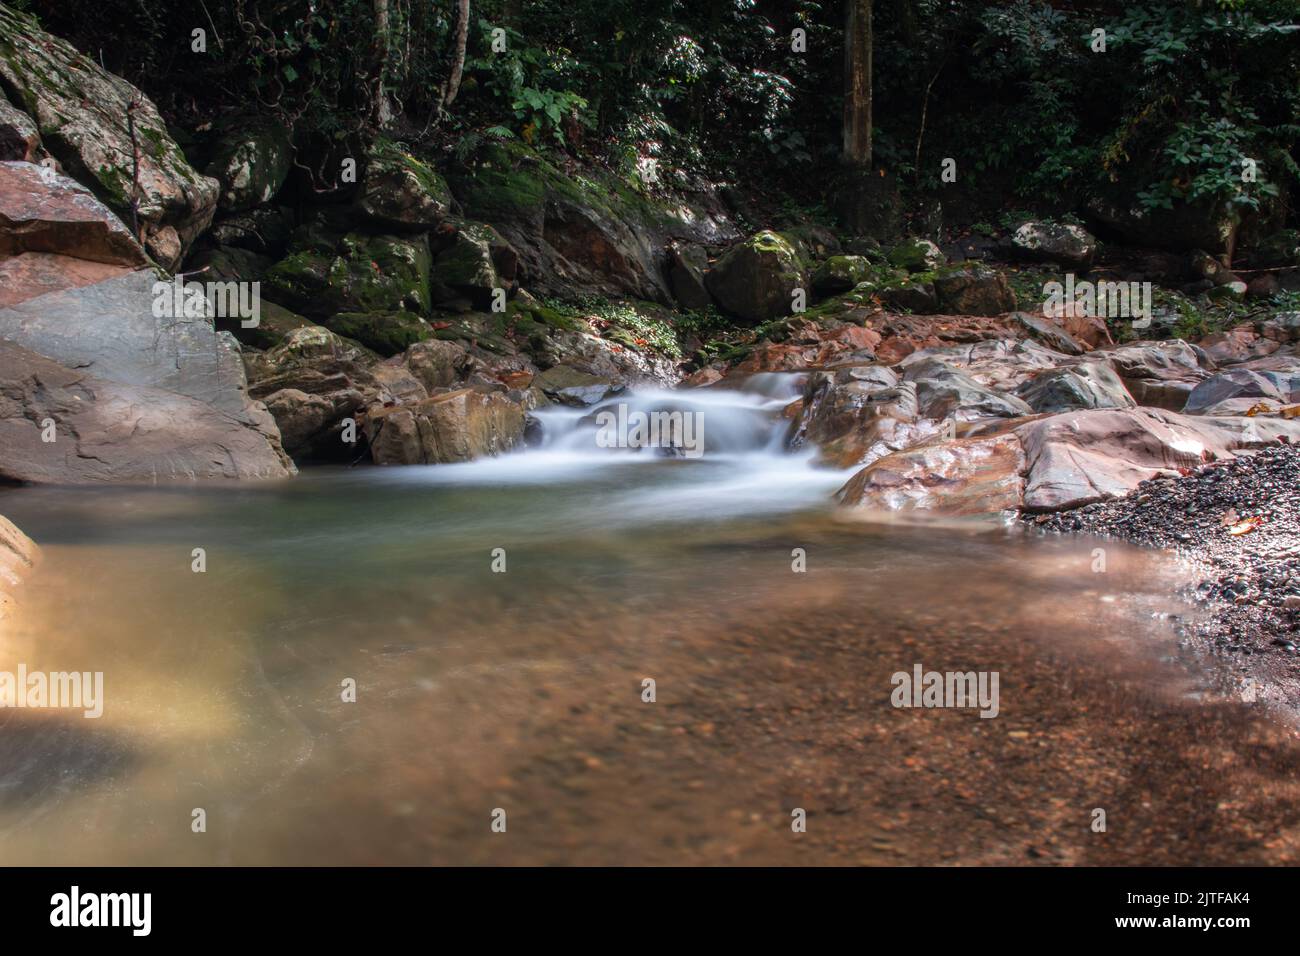 Water flows in a mountain river Stock Photo